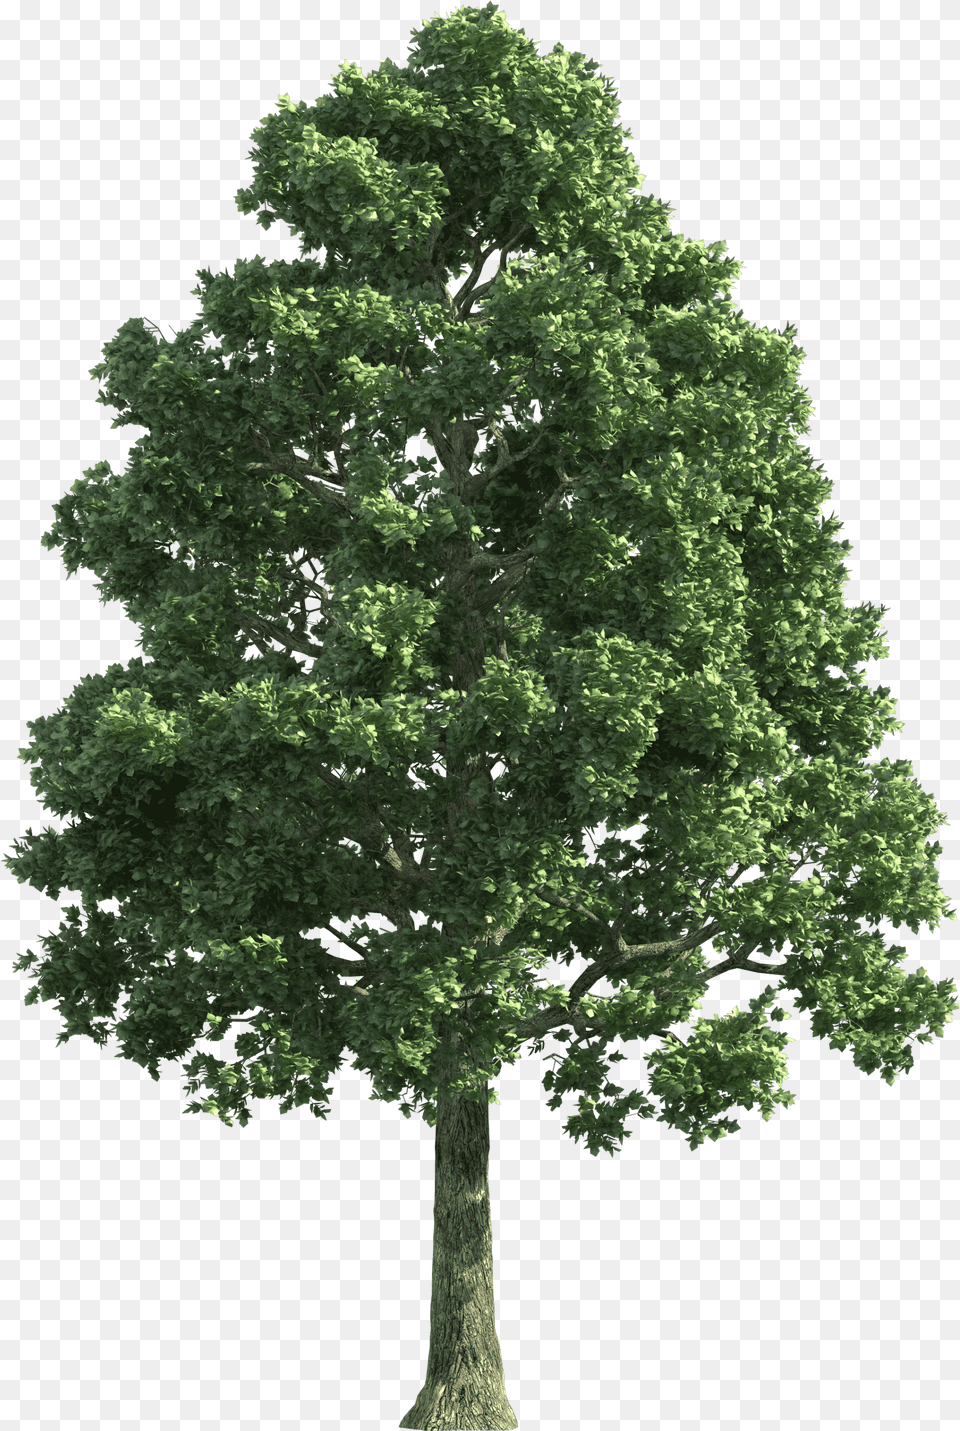 Green Realistic Tree Clip Art Animated Tree Gif, Oak, Plant, Sycamore, Tree Trunk Free Png